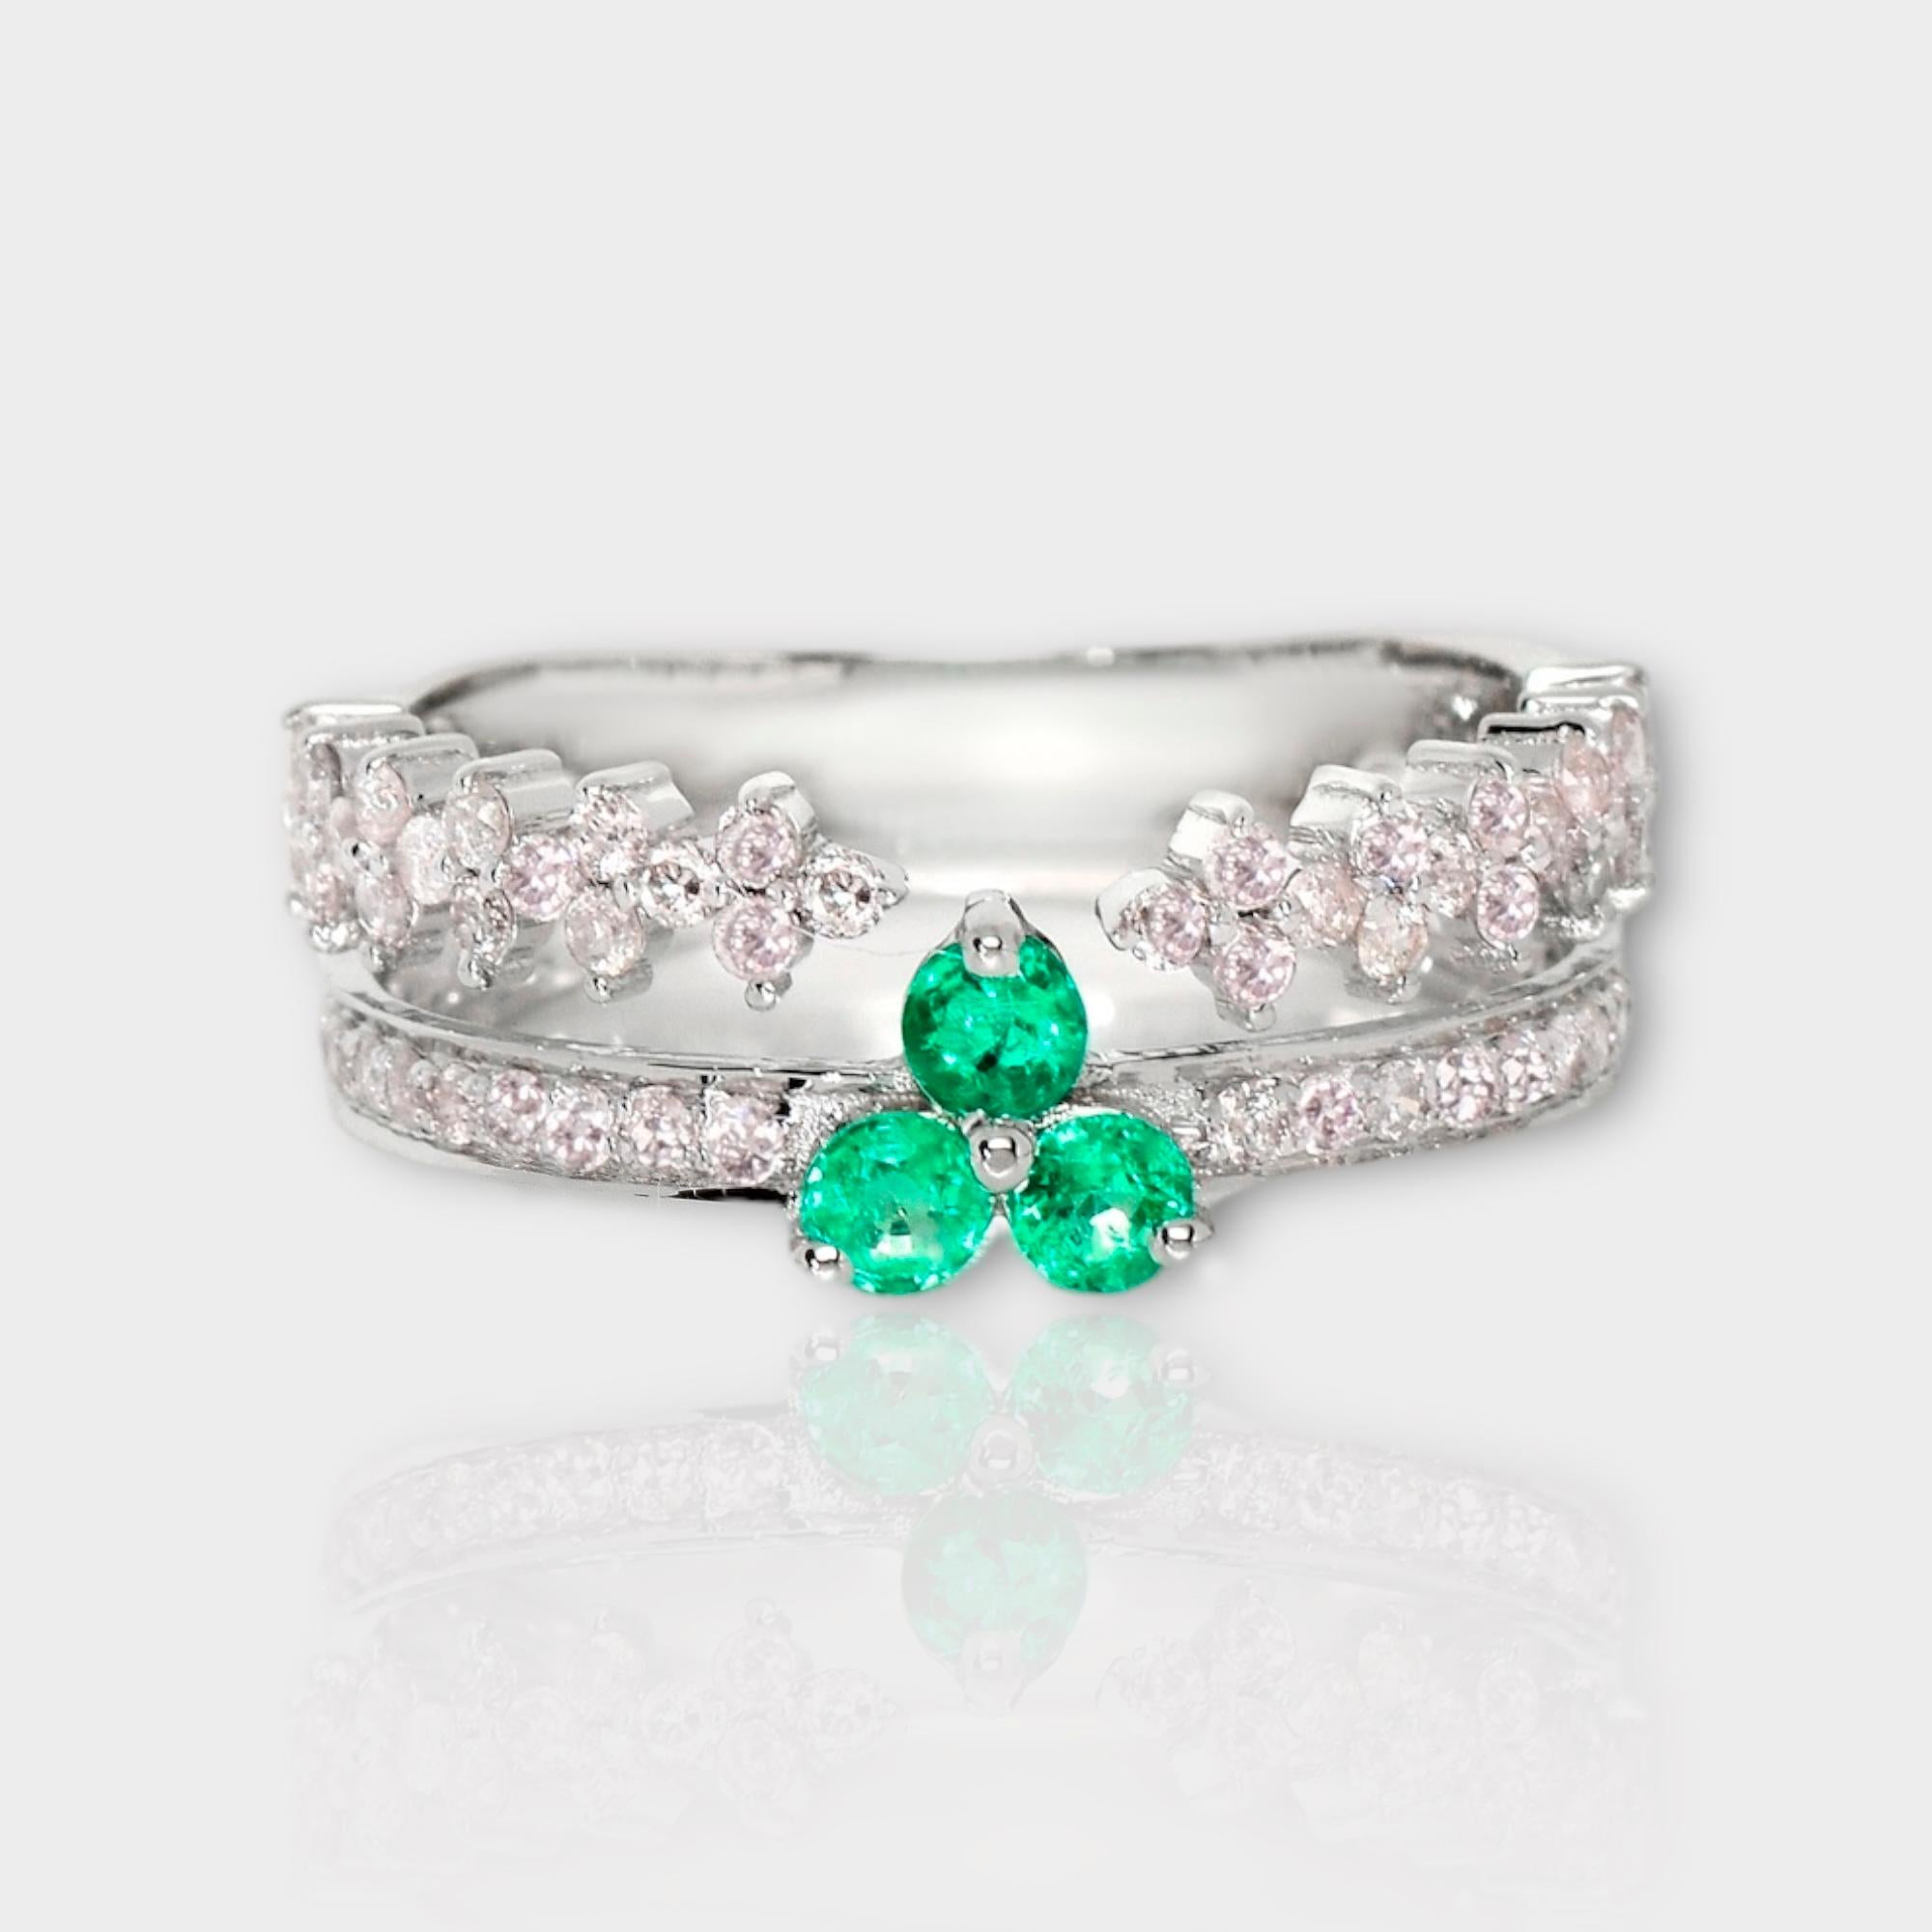 *14K 0.58 ct Natural Pink Diamonds&Emerald Vintage Engagement Ring*

This band features a stunning vintage design with natural pink diamonds weighing 0.58 ct and natural emeralds weighing 0.26 ct. 

Main Stone
Variety: Natural Diamond
Shape: Round